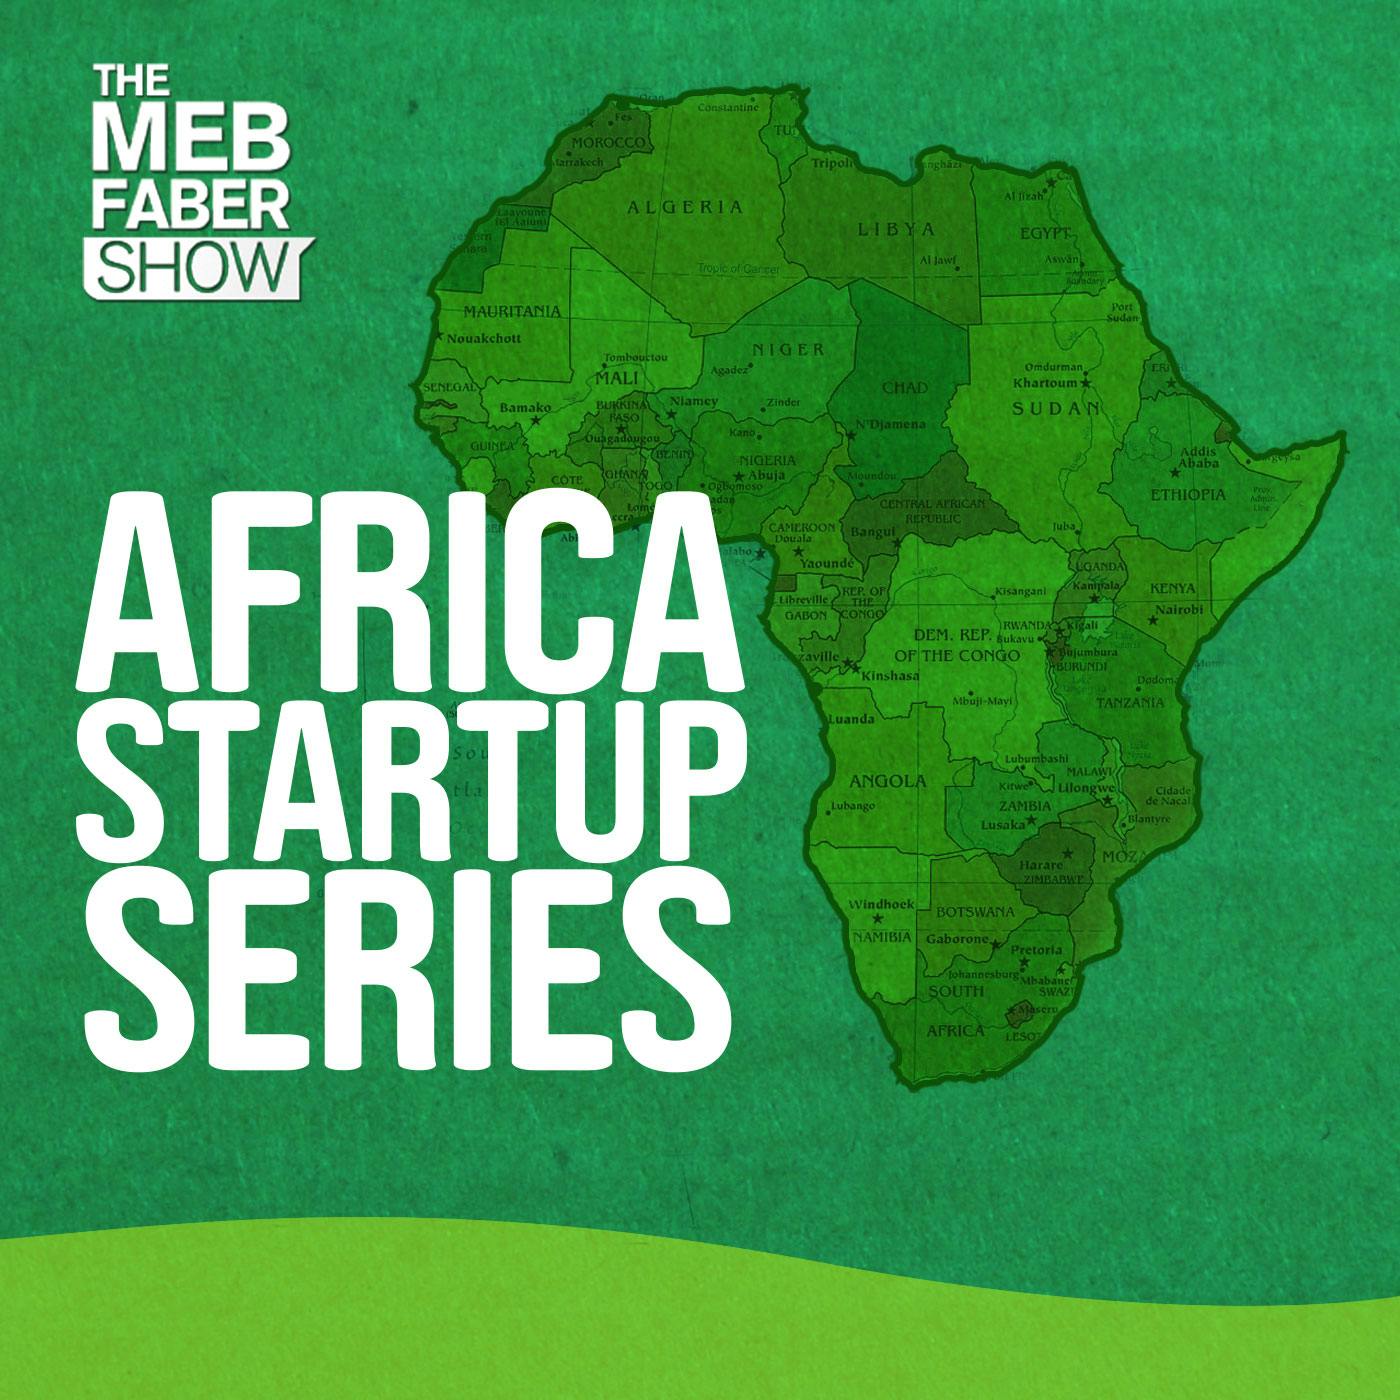 Africa Startup Series – Maya Horgan Famodu, Ingressive Capital - Africa Holds The Fastest Growing Consumer Class, Fastest Growing Population & Fastest Growing Middle Class in The World | #369